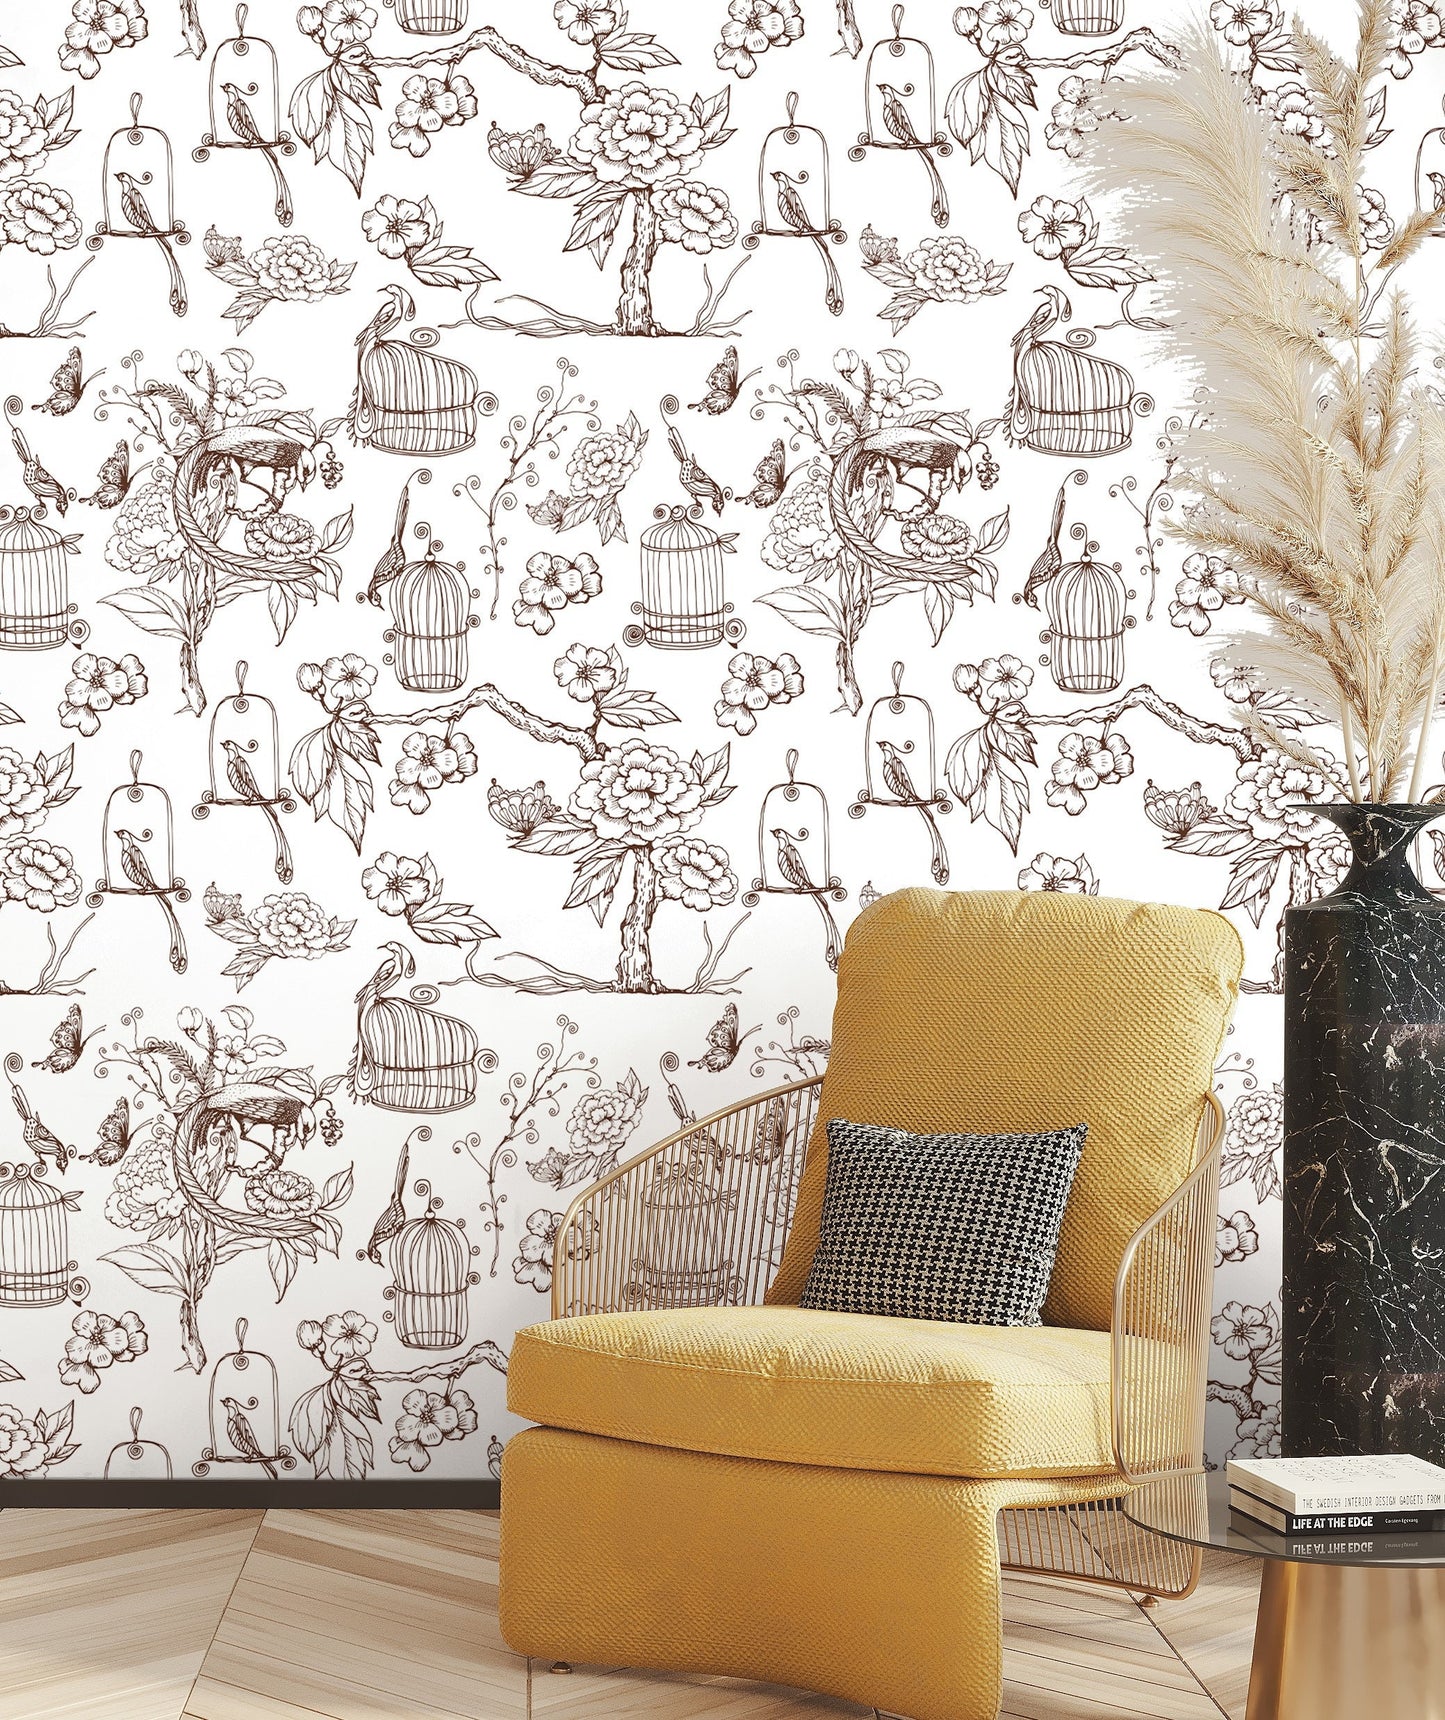 Bird Cage Wallpaper, Asian Wallpaper Peel and Stick, Hand Drawn Wallpaper, Removable Wall Paper